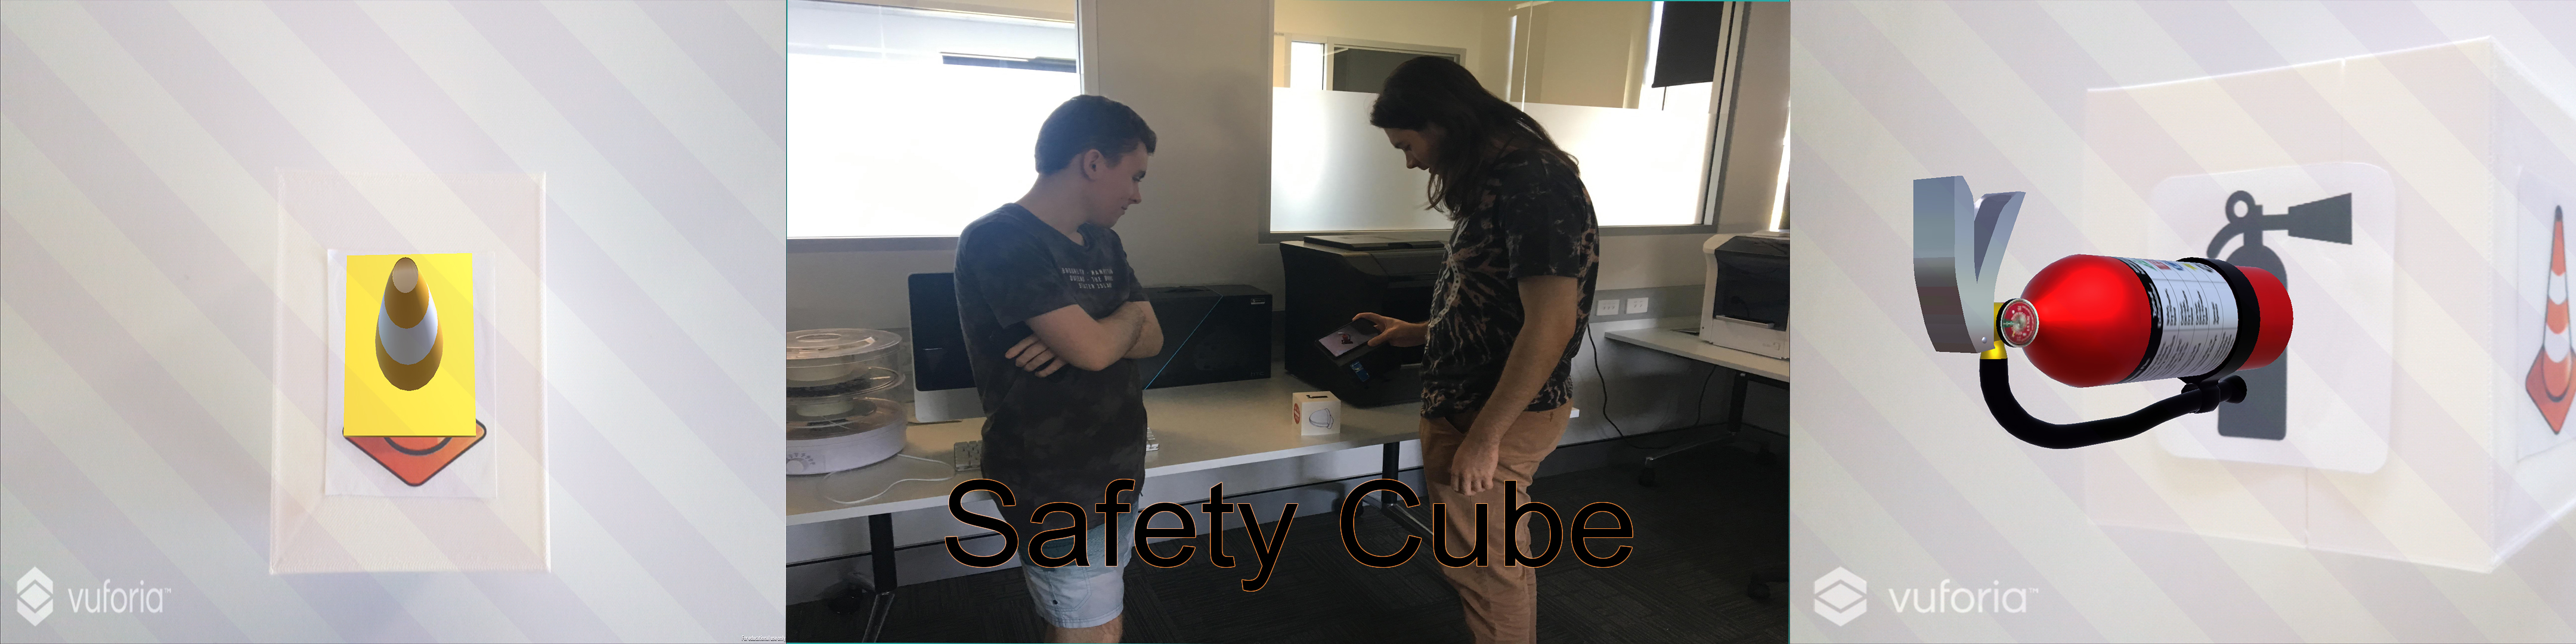 Safety Cube